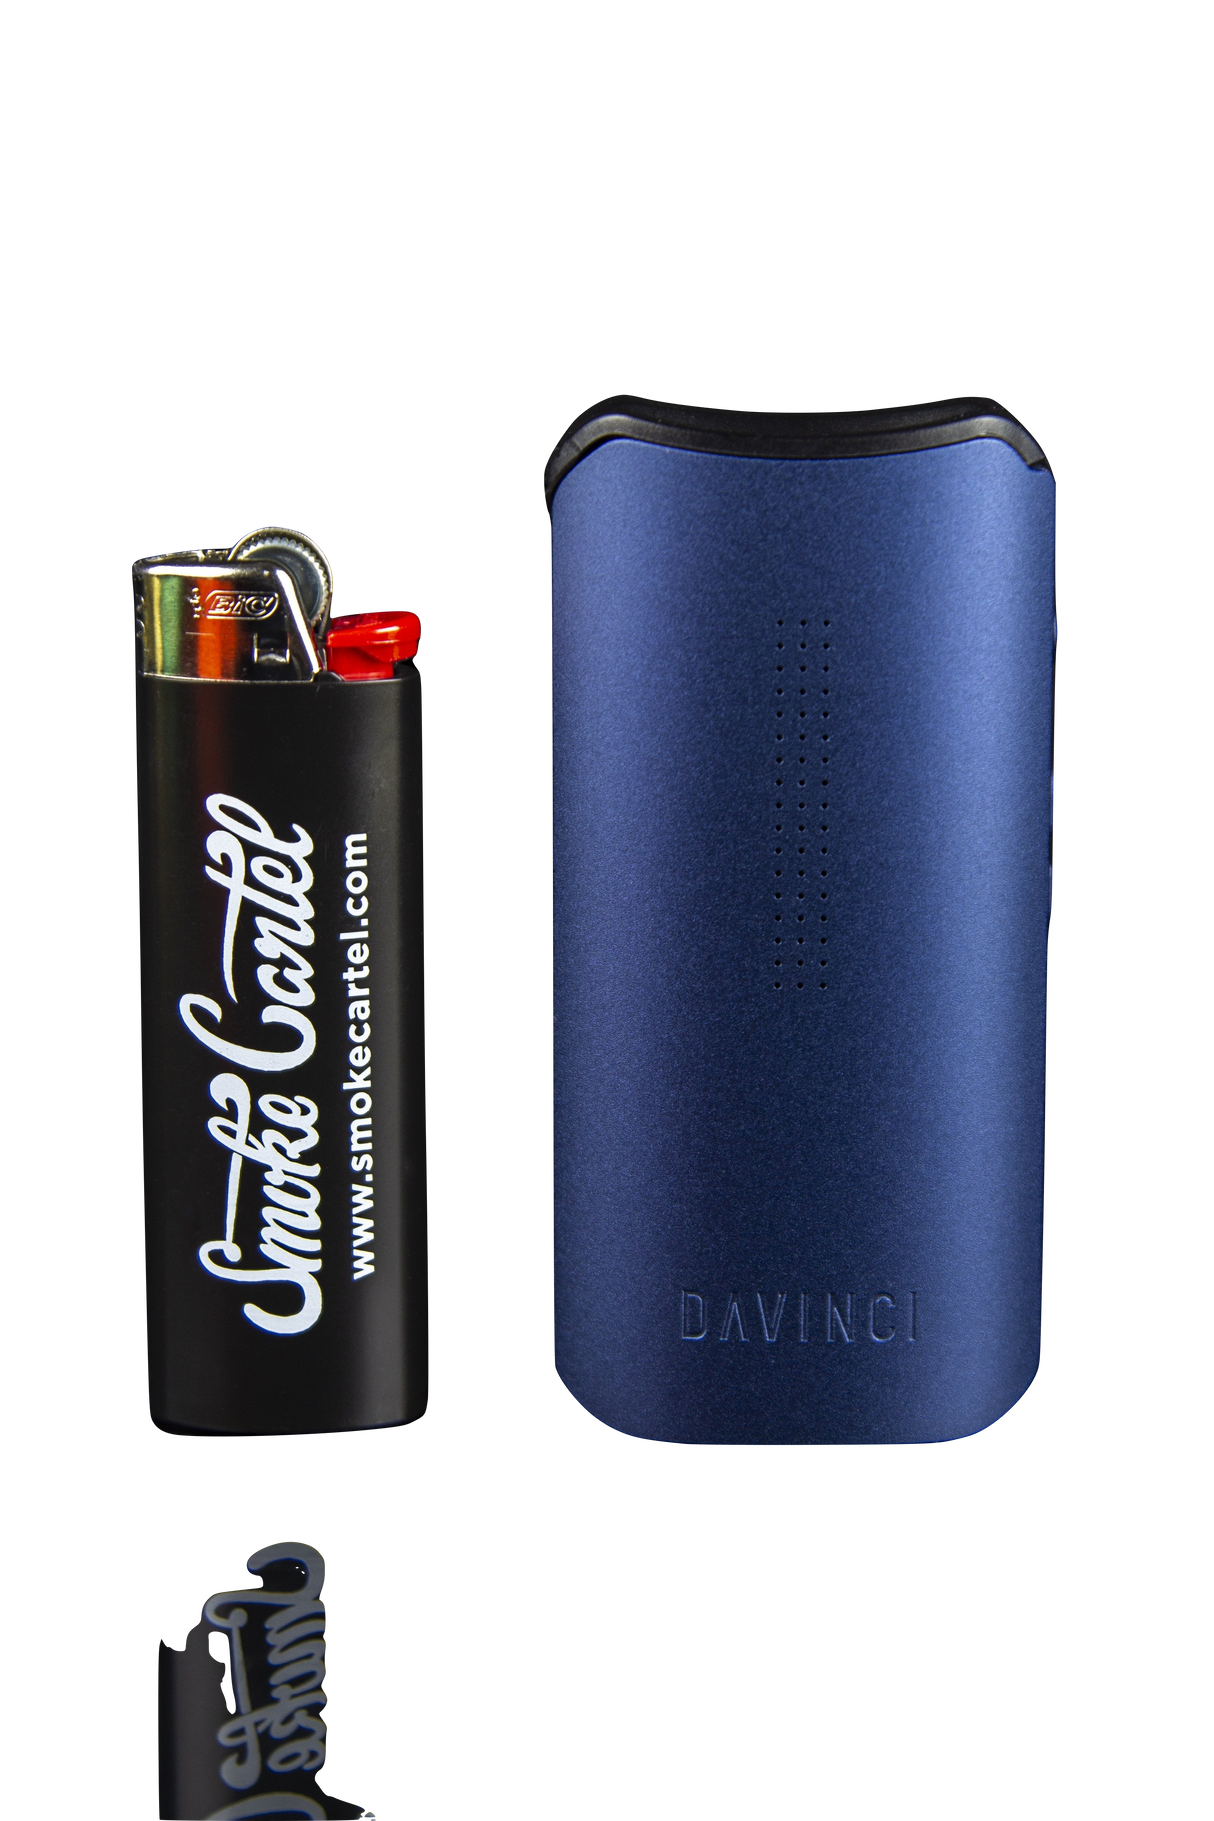 DaVinci IQC Vaporizer in Blue - Portable Design with Battery Power - Front View